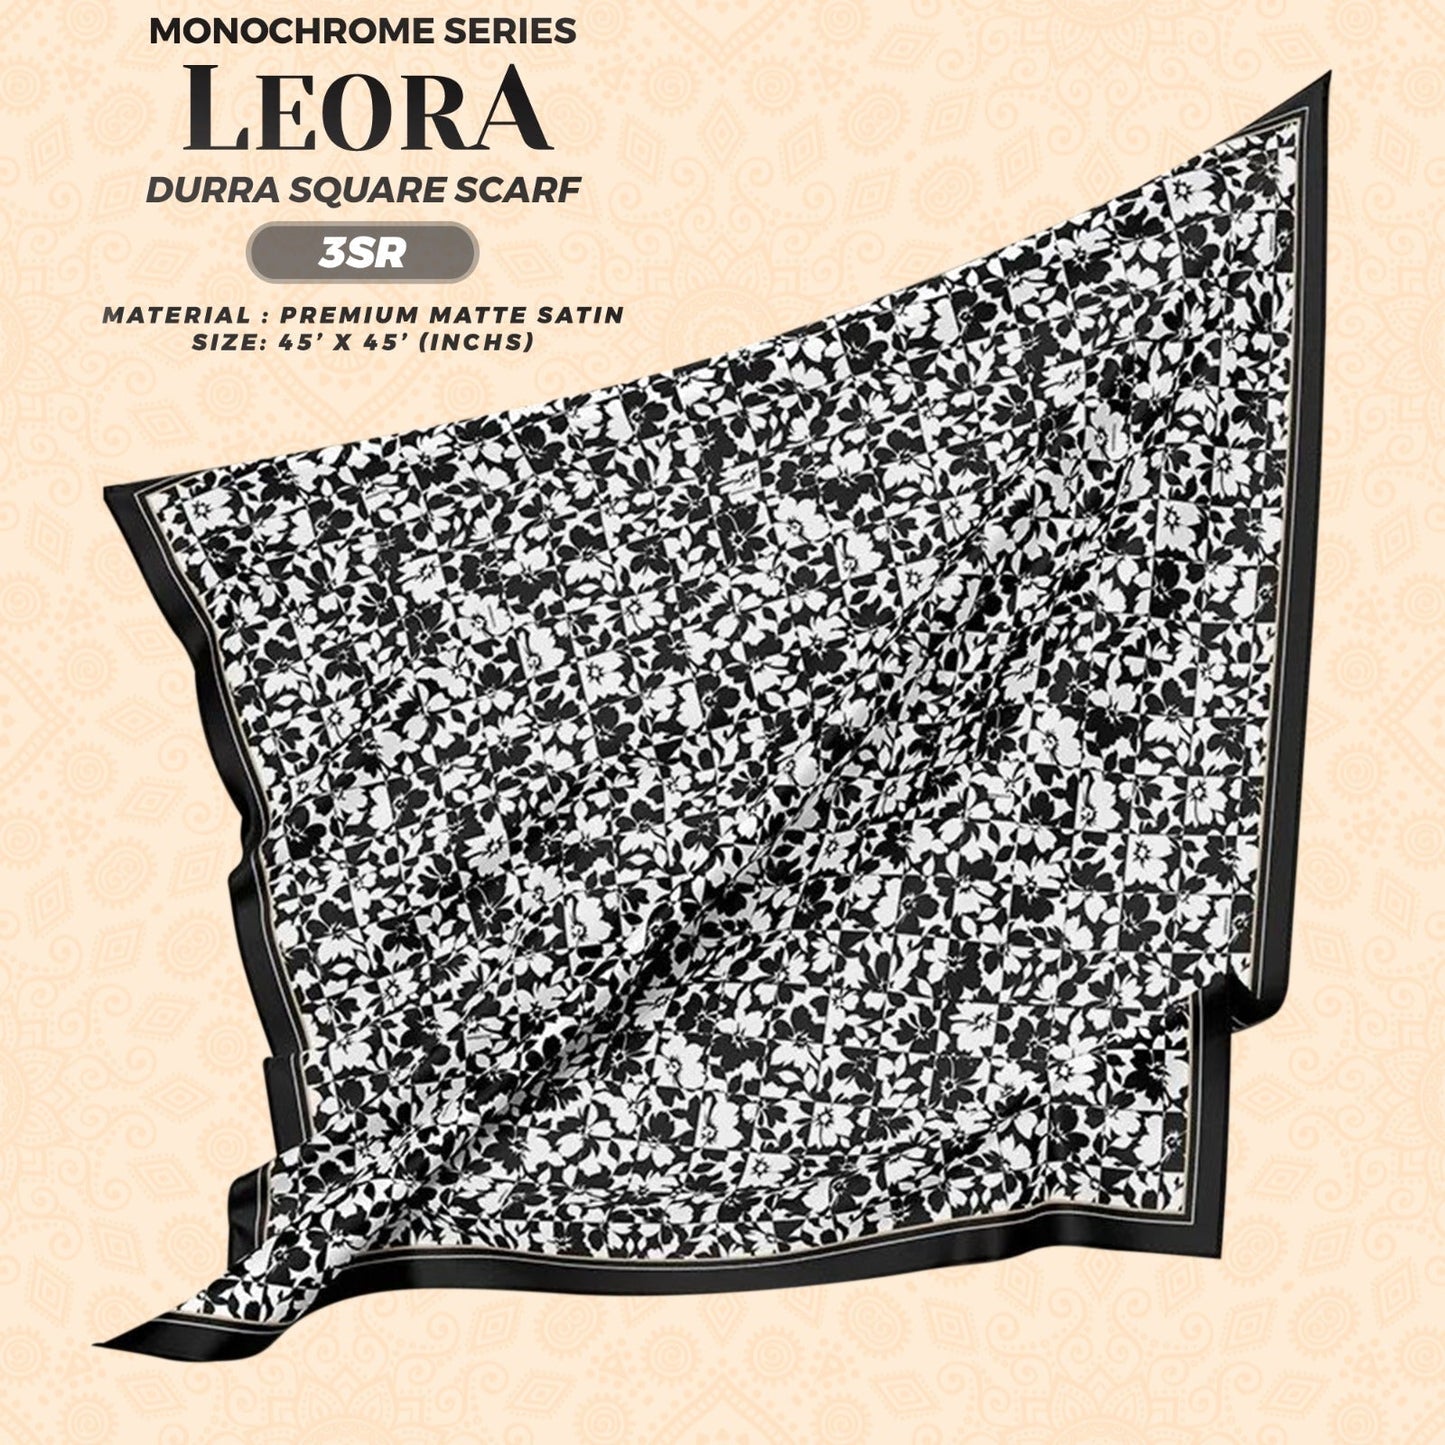 Sofearose Inspired Dura Monochrome Scarf SQ Collection